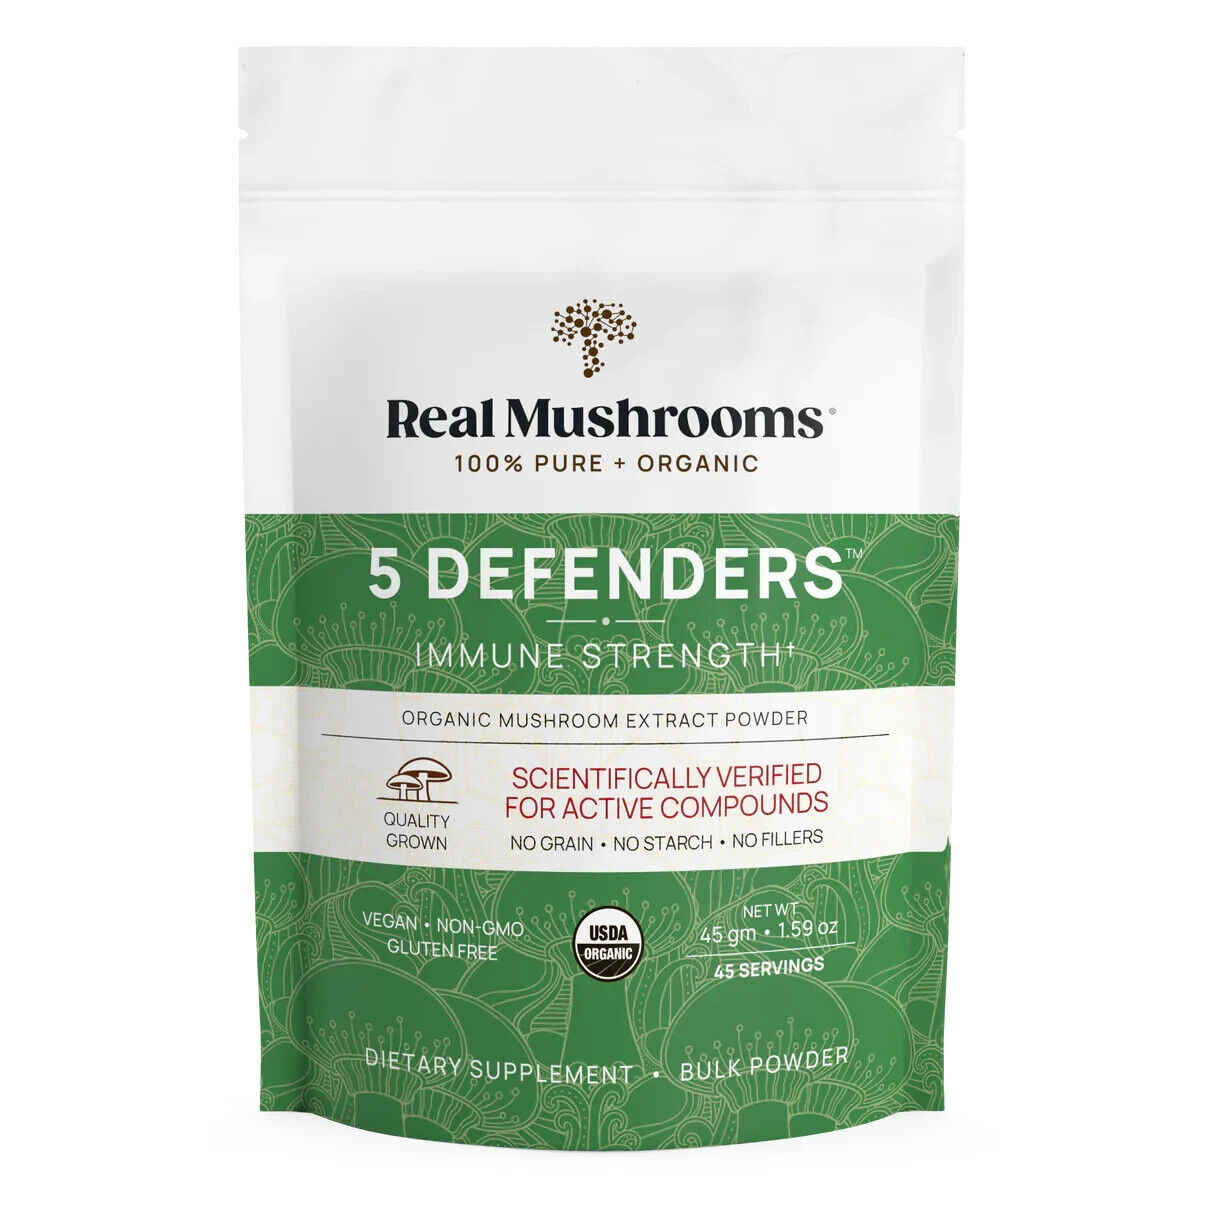 Real Mushrooms 5 Defenders for Pets Bulk Powder Organic Extracts 100g NEW